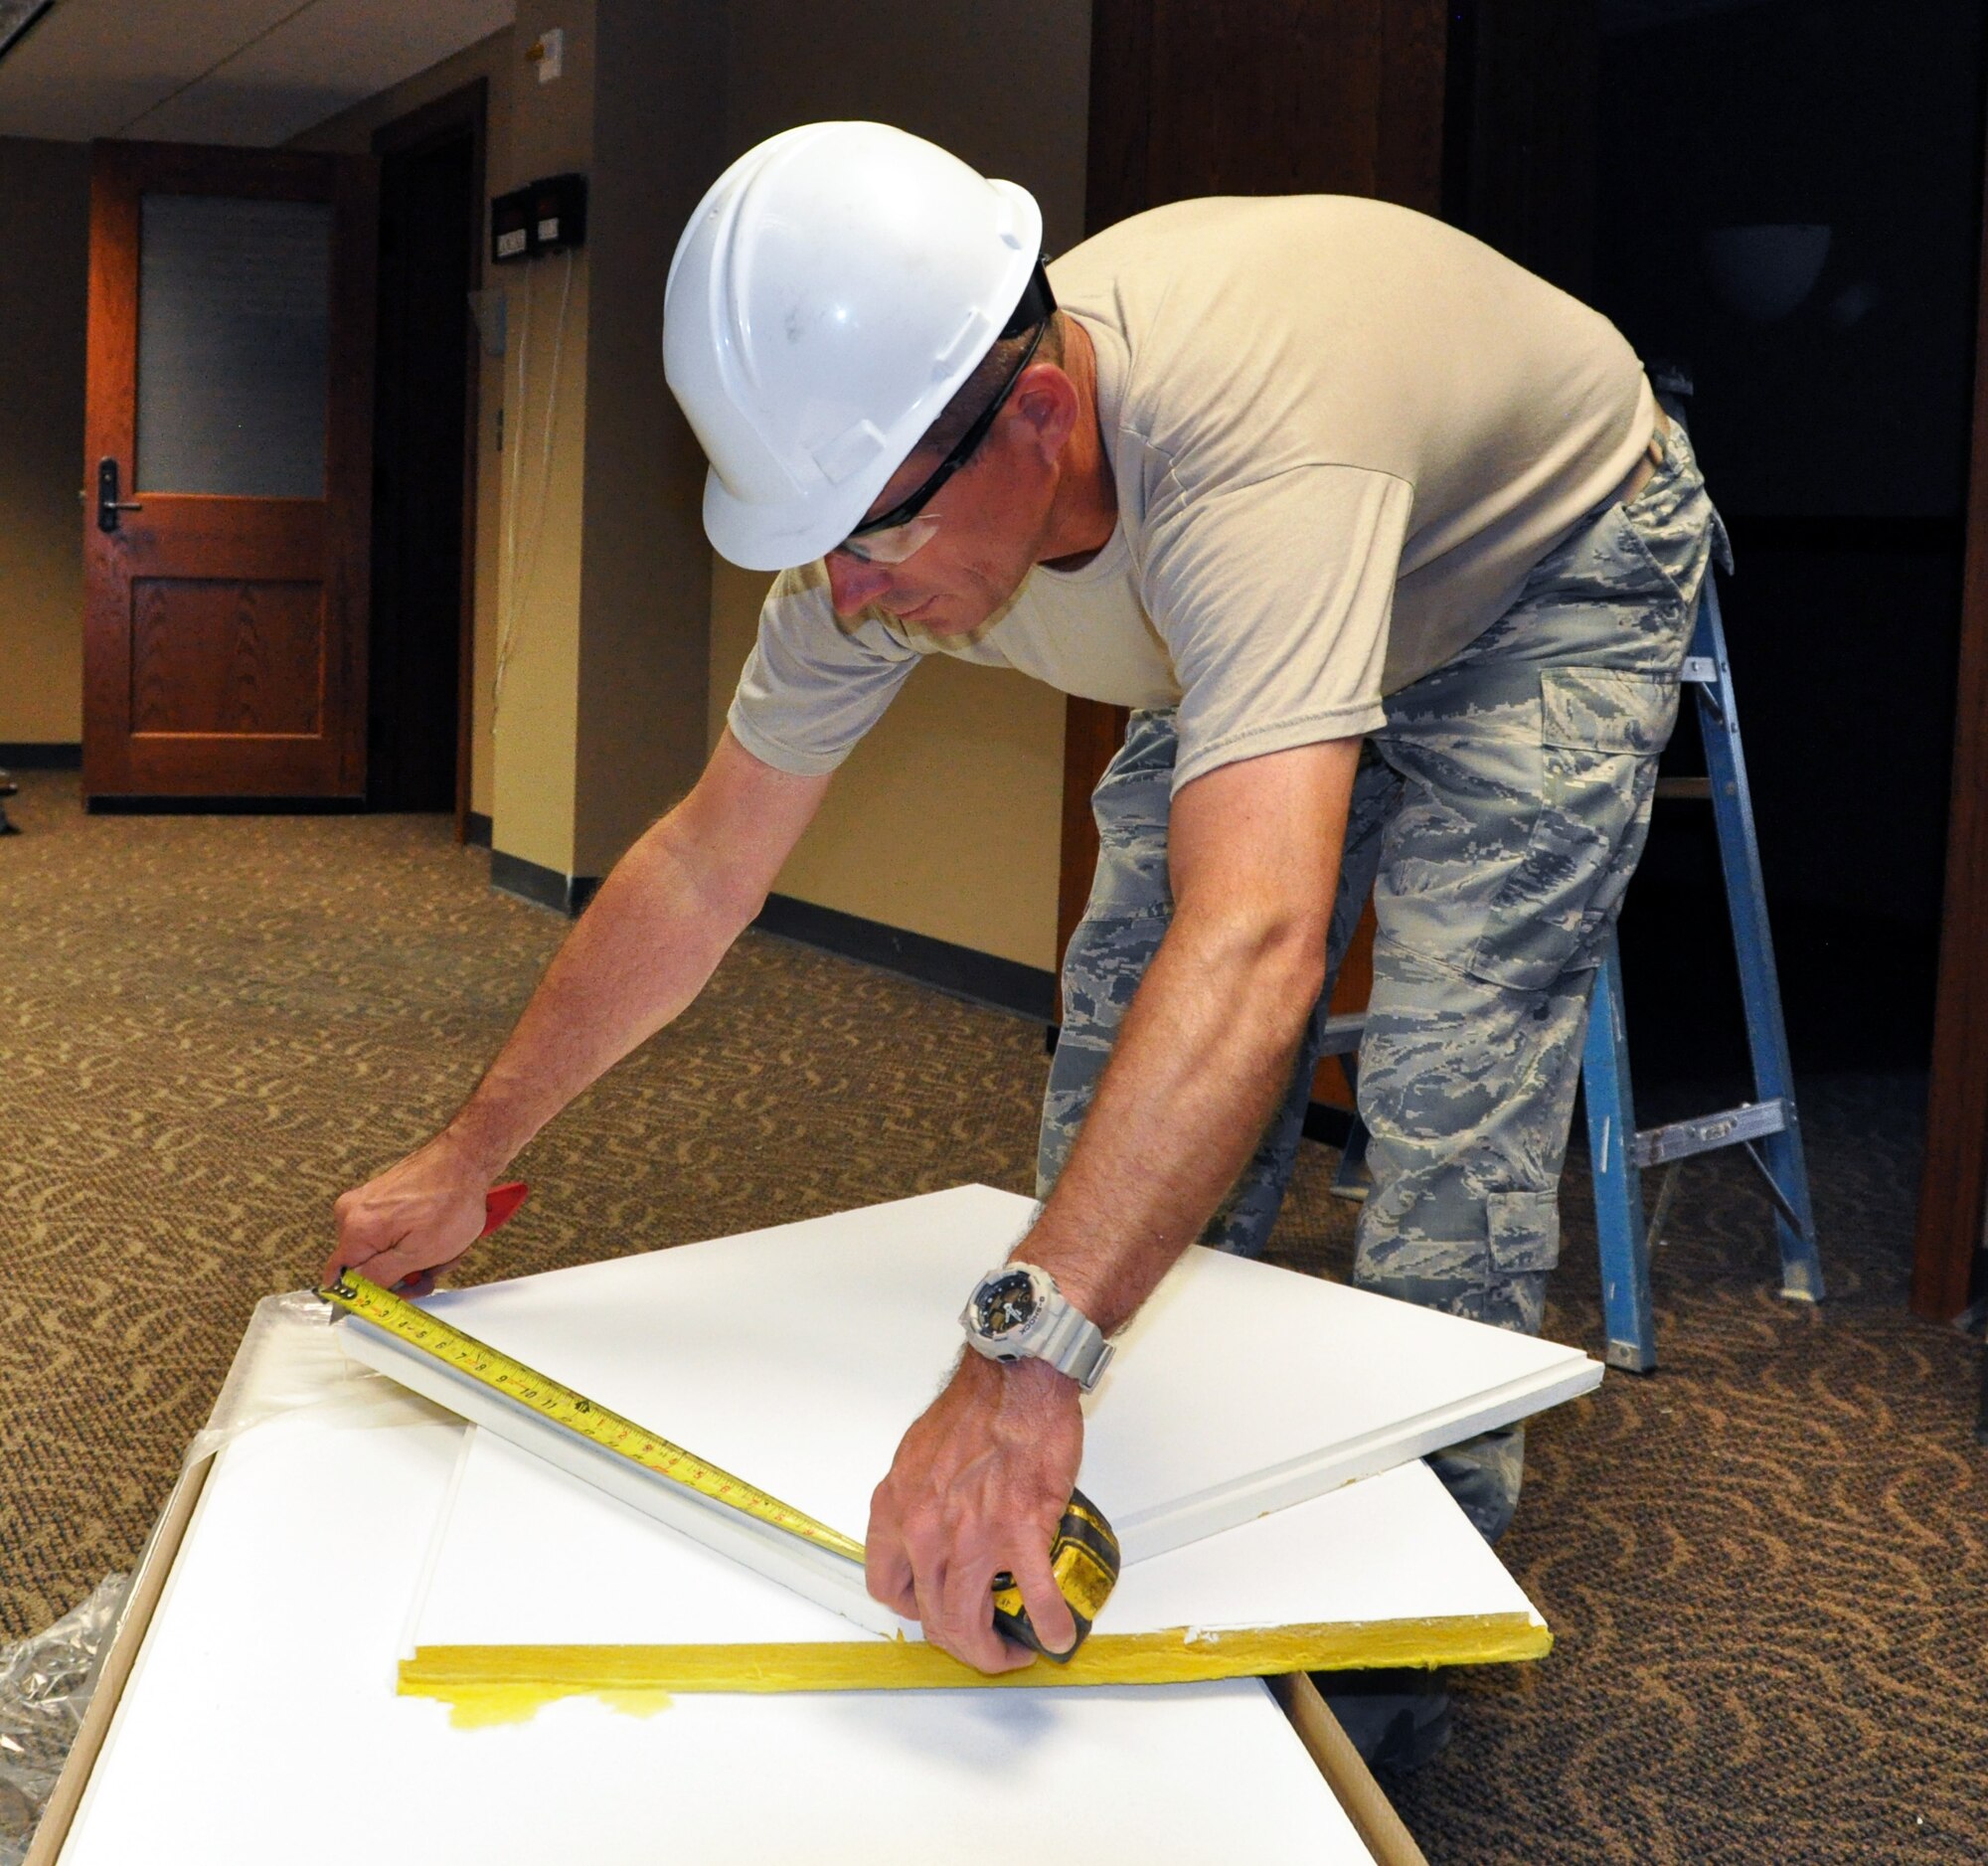 Tech. Sgt. Kevin Toomey, 931st Civil Engineer Squadron, measures a sound dampening ceiling panel before cutting it for installation in Building 1218 at McConnell Air Force Base, Kan., July 11, 2015.  The installation is part of a renovation project on the building, during which 931 CES Airmen have installed both the new ceiling panels as well as new floor tiles. Additionally, over the last two months 931 CES Airmen have made significant contributions to the remodel of Building 1219, to include work in plumbing and heating, ventilating and air conditioning (HVAC).  931 CES Airmen consistently work together with their active duty counterparts from the 22nd Air Refueling Wing to repair and improve the facilities of McConnell Air Force Base.  (U.S. Air Force photo by Capt. Zach Anderson) 